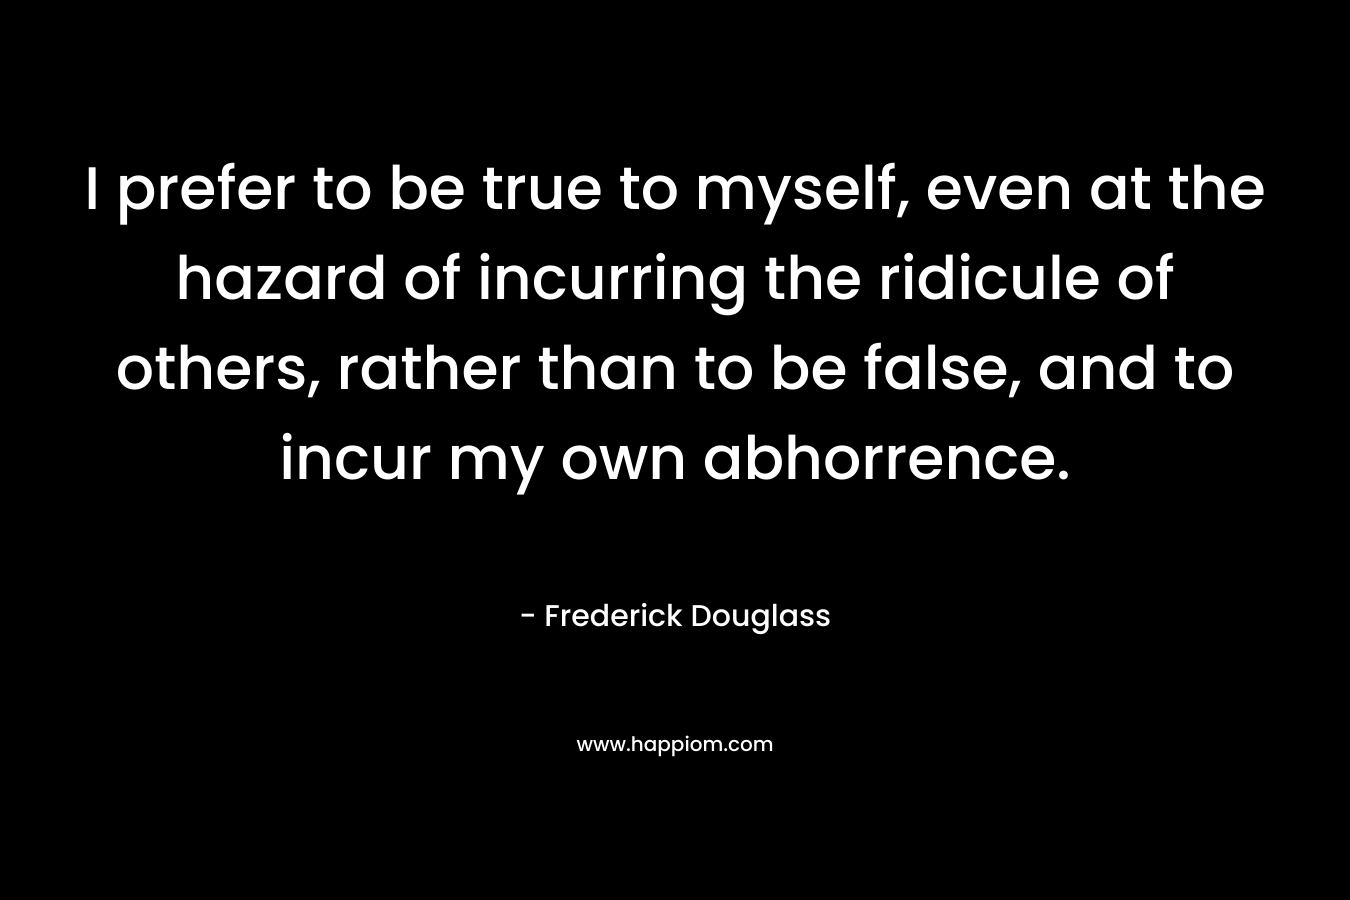 I prefer to be true to myself, even at the hazard of incurring the ridicule of others, rather than to be false, and to incur my own abhorrence. – Frederick Douglass